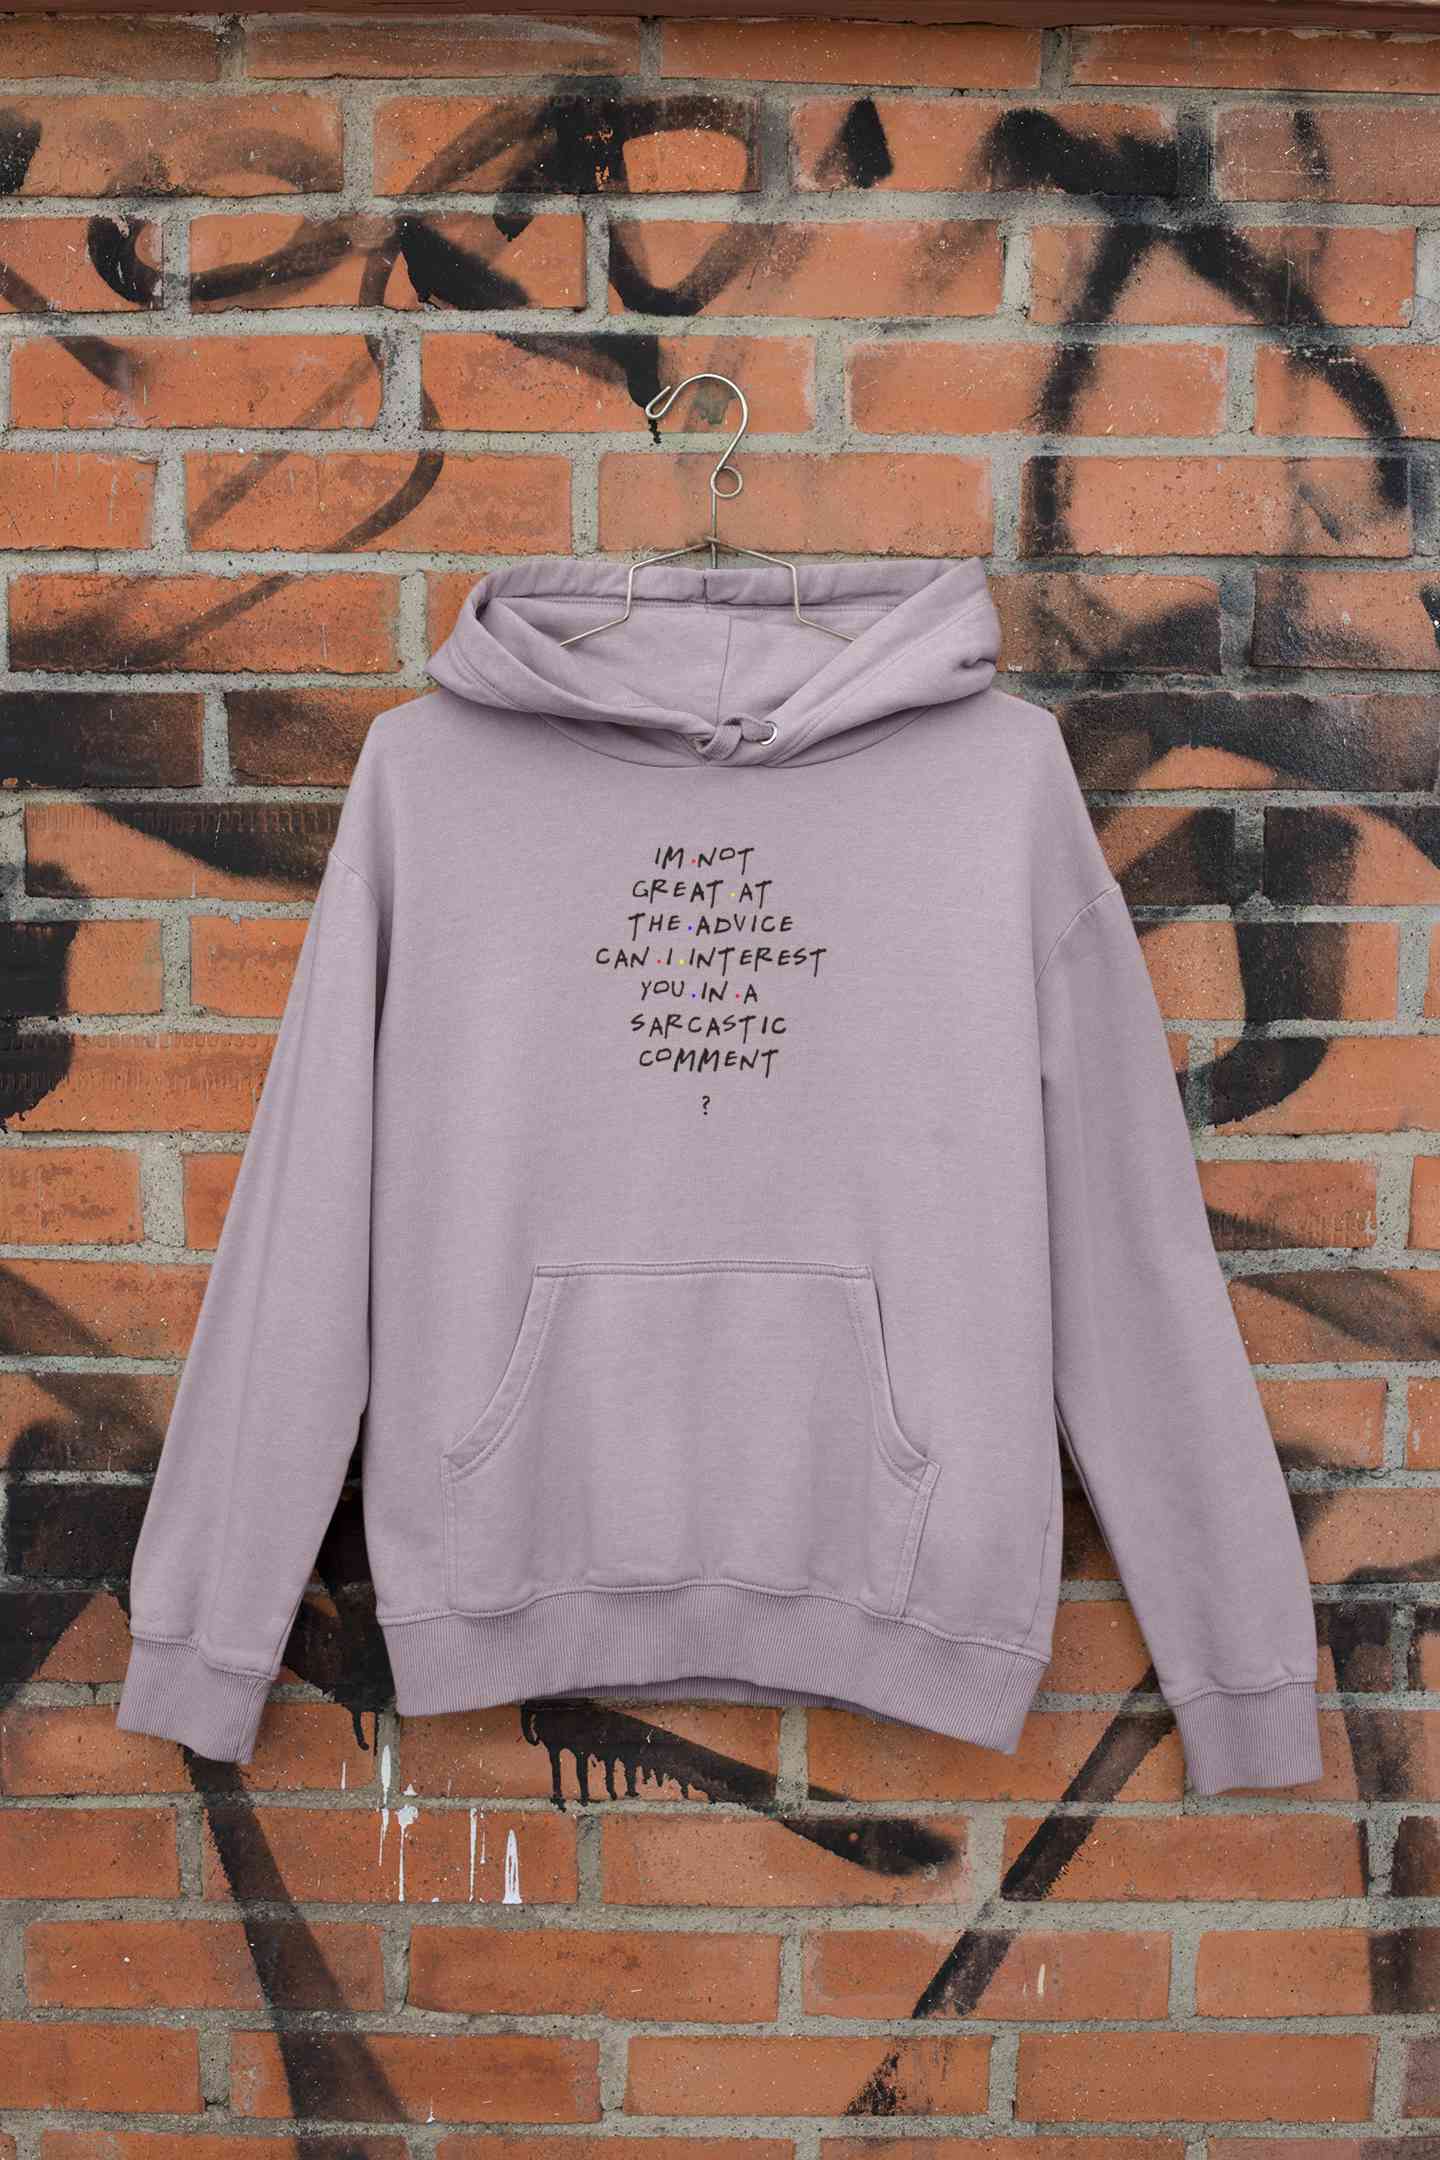 F.R.I.E.N.D.S Sarcastic Comment Chandler Quotes Hoodies for Women-FunkyTeesClub